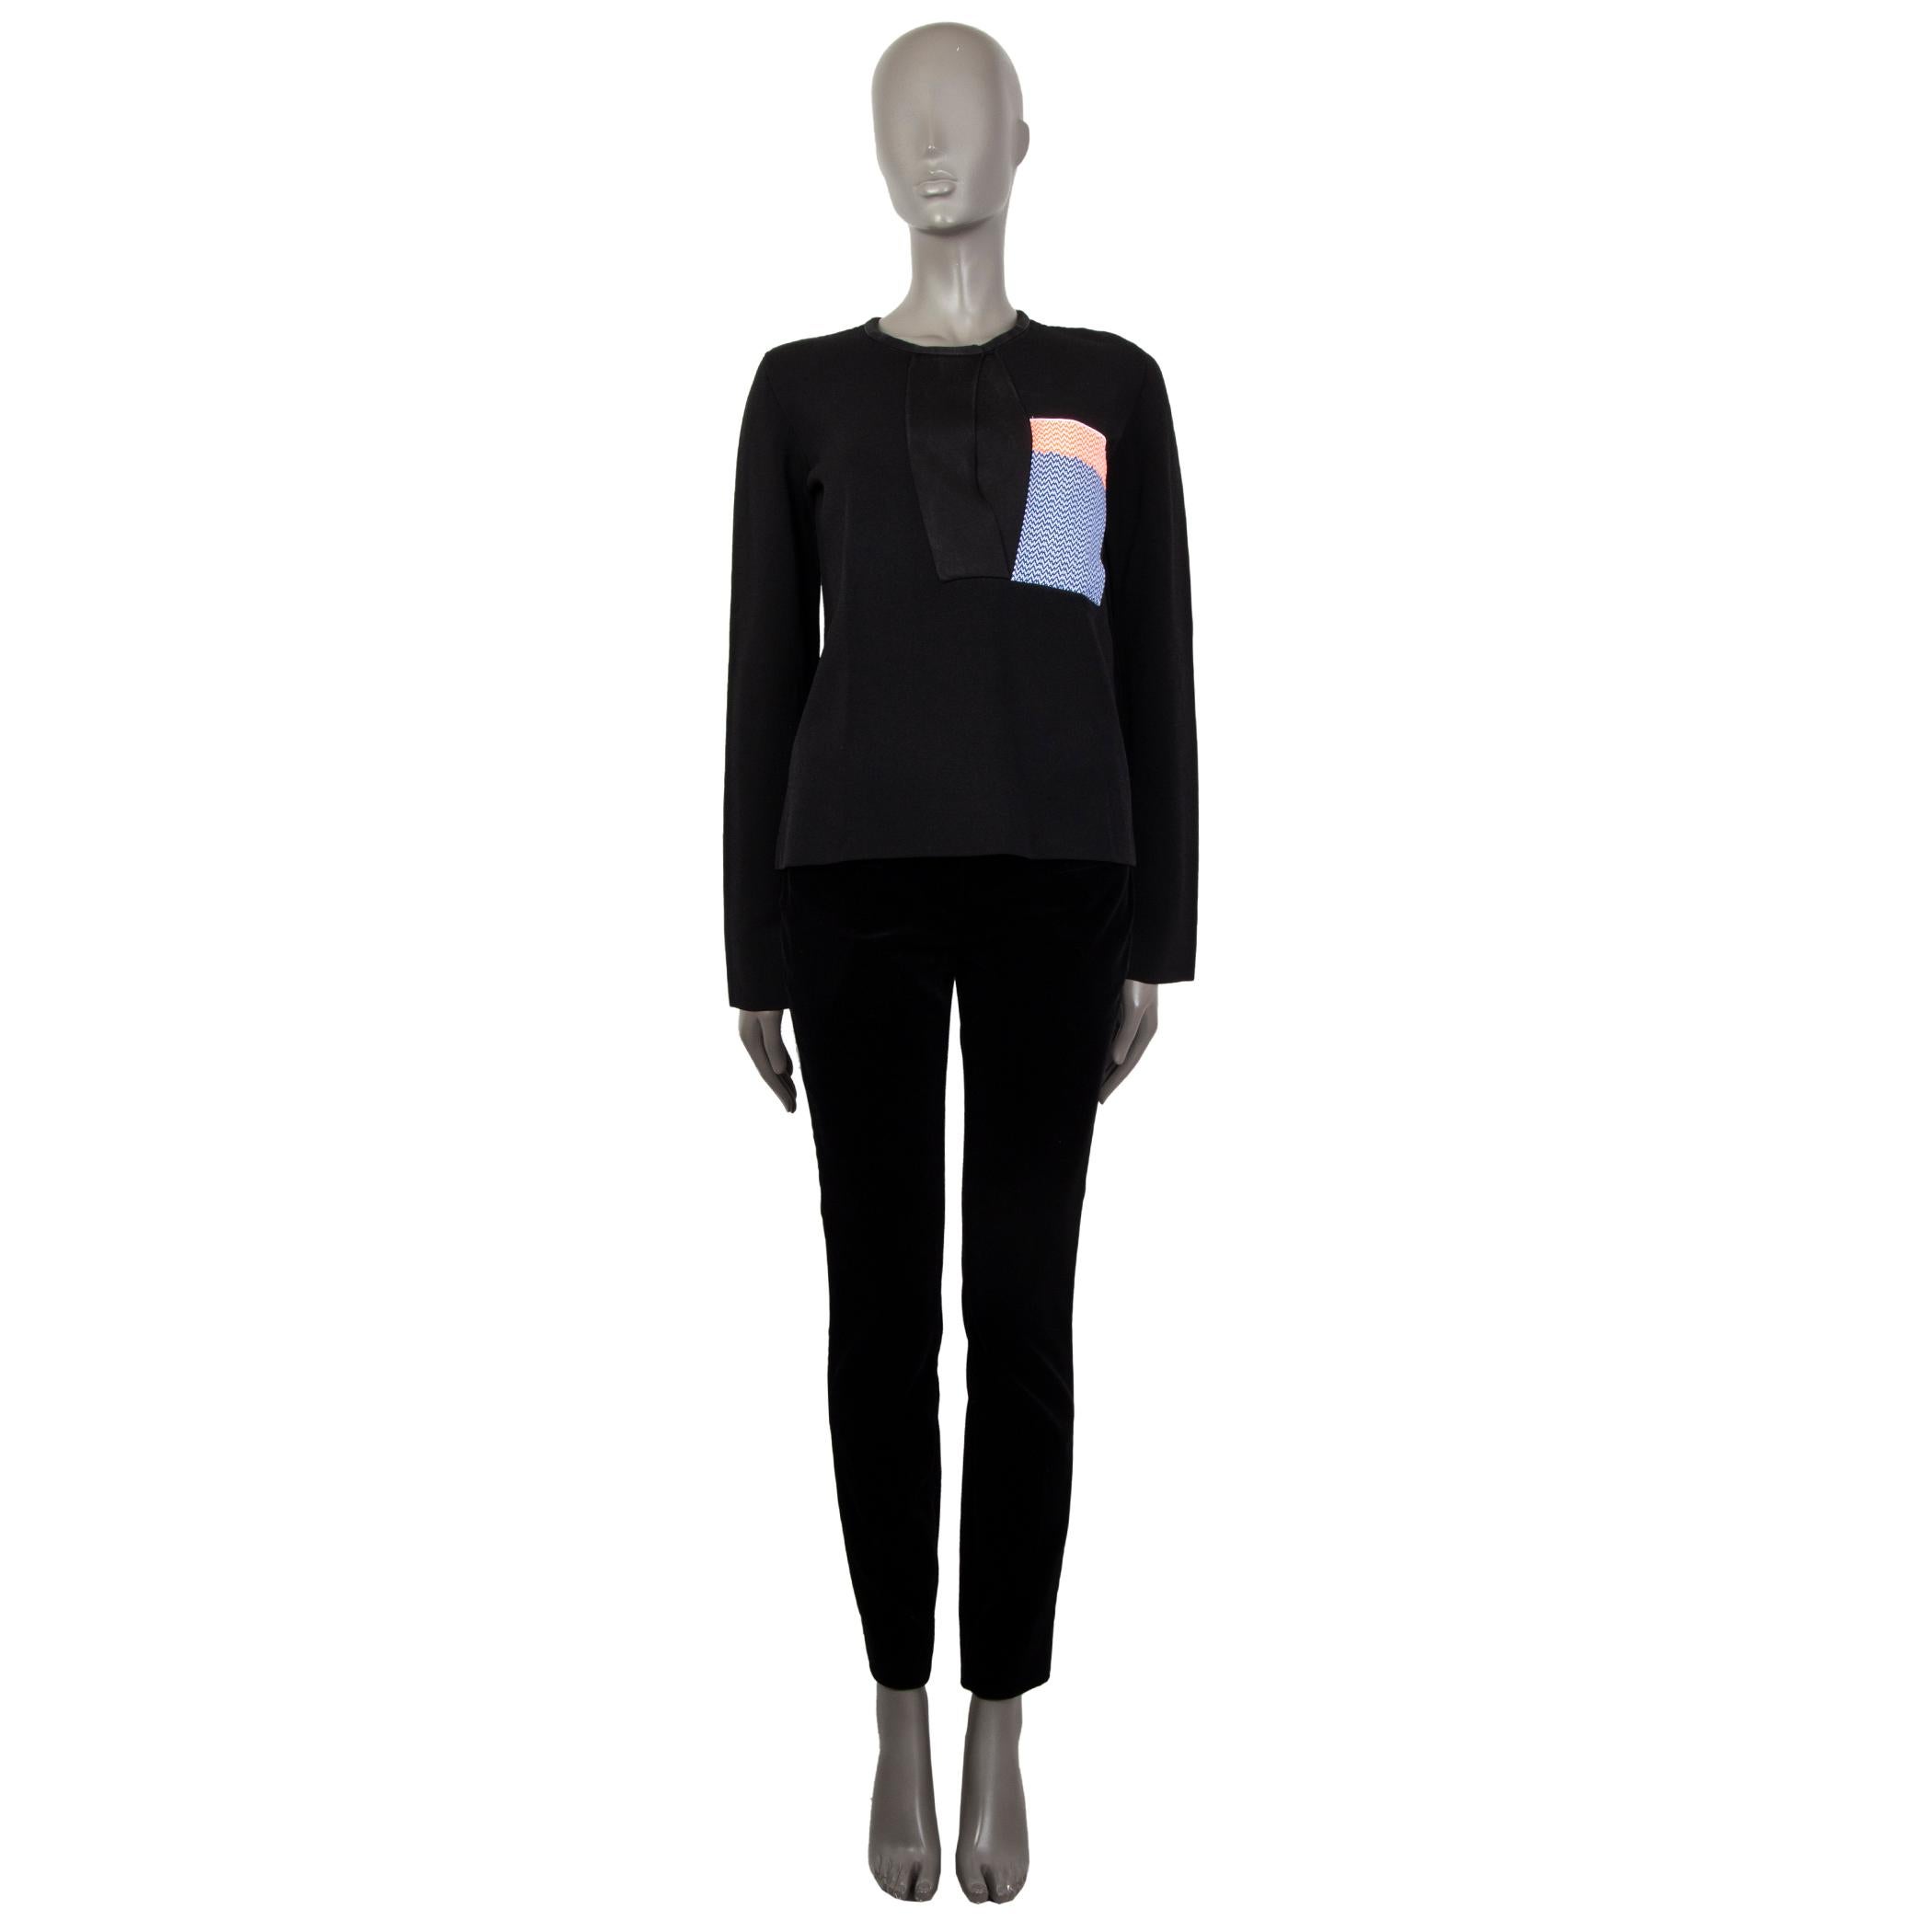 100% authentic Céline keyhole top in black, blue, white and neon-orange mulberry silk (51%) viscose (38%) polyamide (6%) with a patchwork-pocket in two-color block in the front, long sleeves, round collar. Unlined. Has been worn and is in good